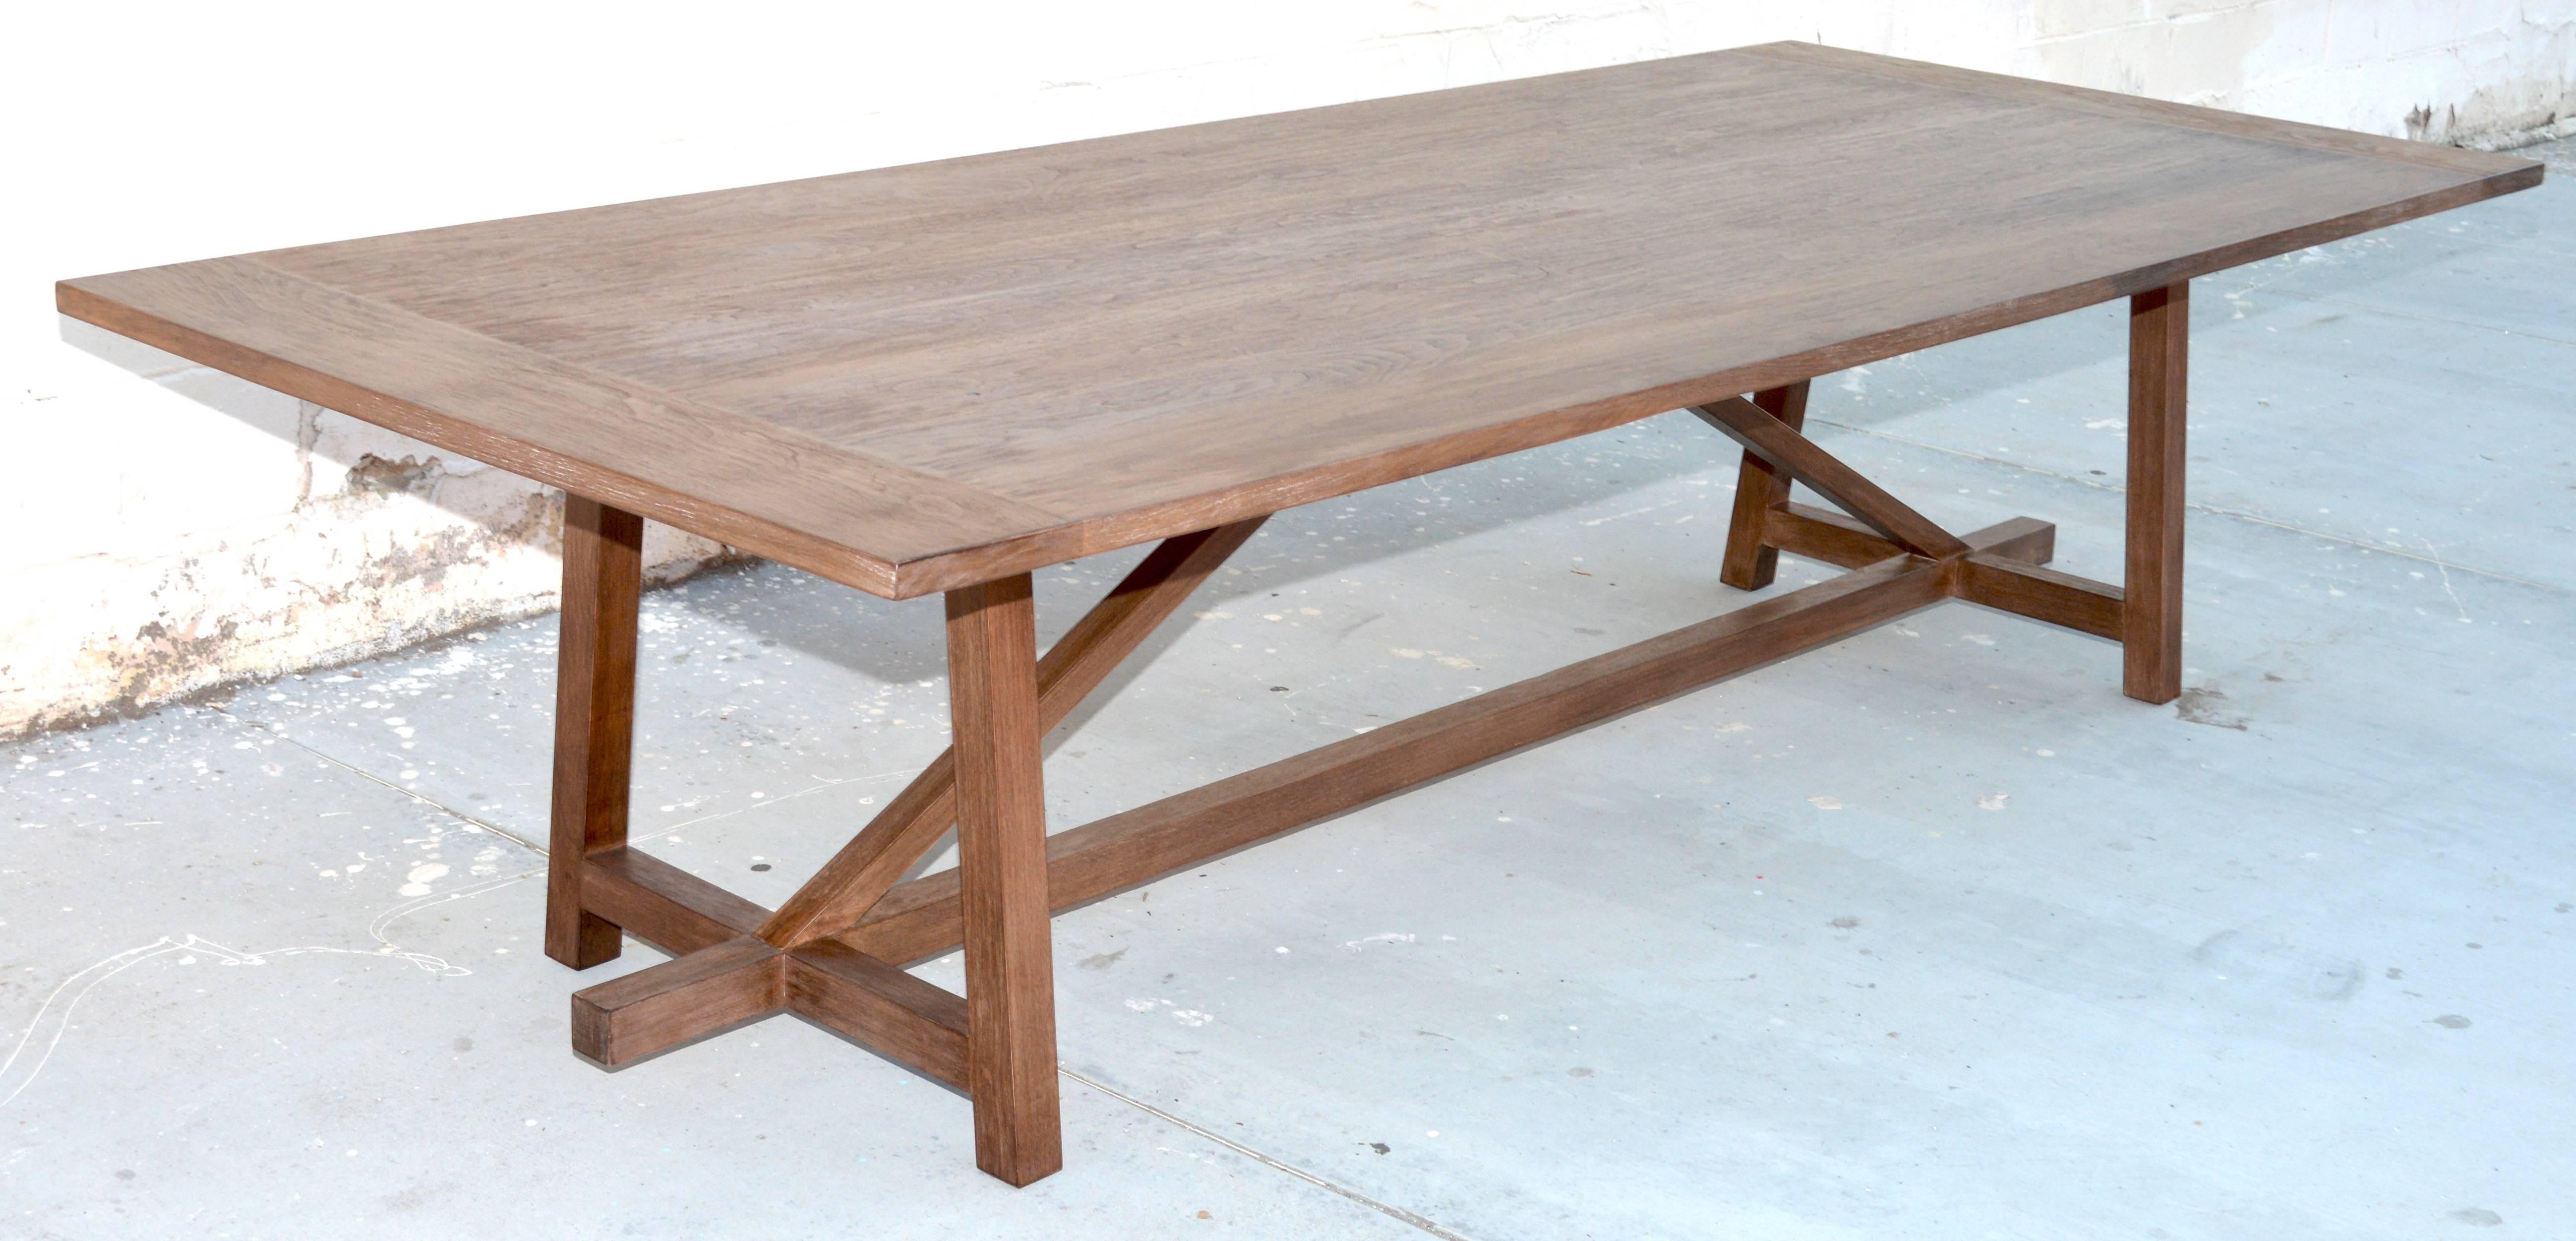 This custom dining table built in aged walnut is one of many tables we build to order using hand selected planks. The specific size shown here is 120 inches x 48 inches x 30 inches H, in black walnut. This table also has the option of expandable